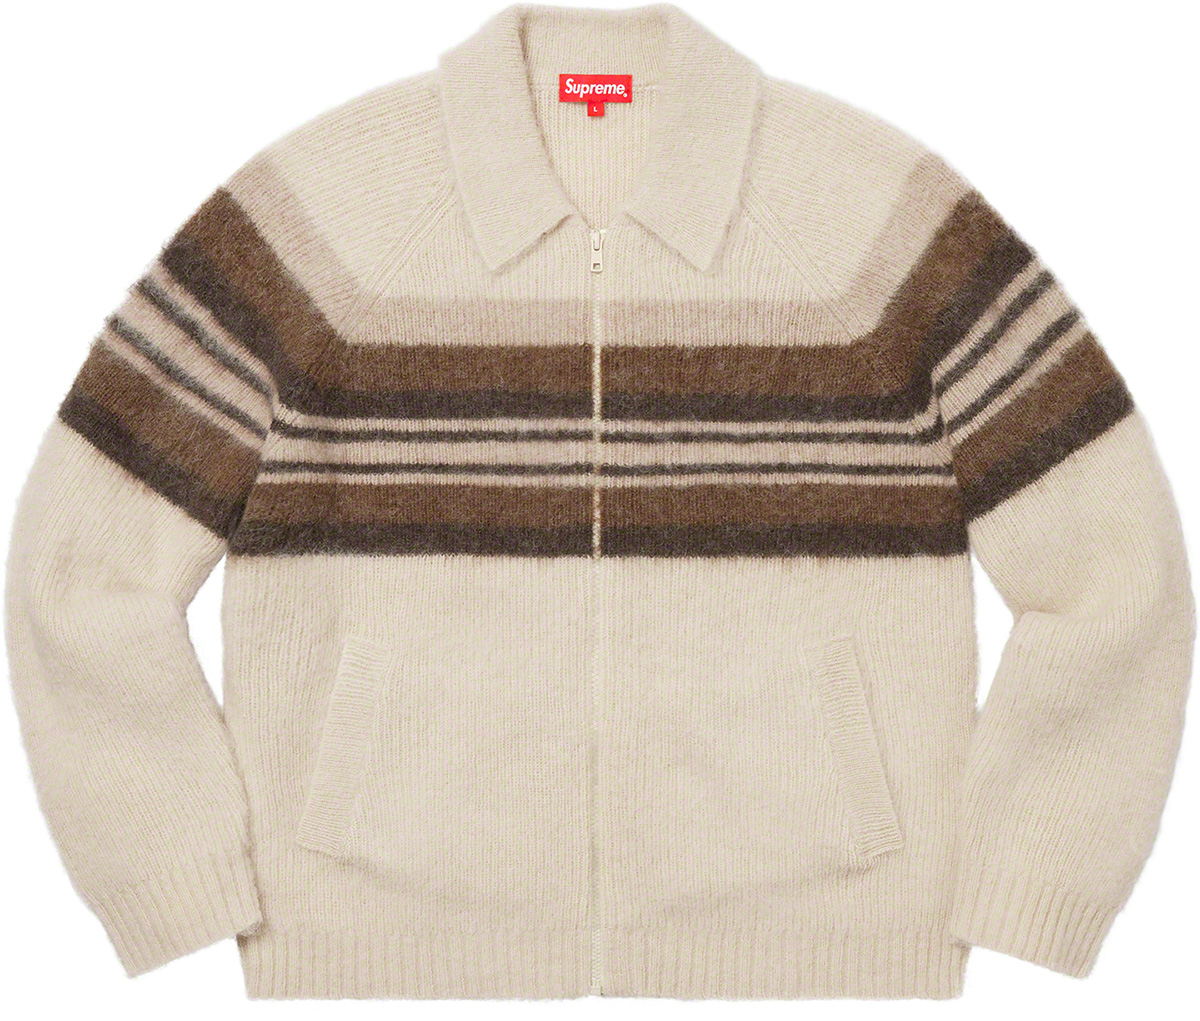 Brushed Wool Zip Up Sweater - Supreme Community